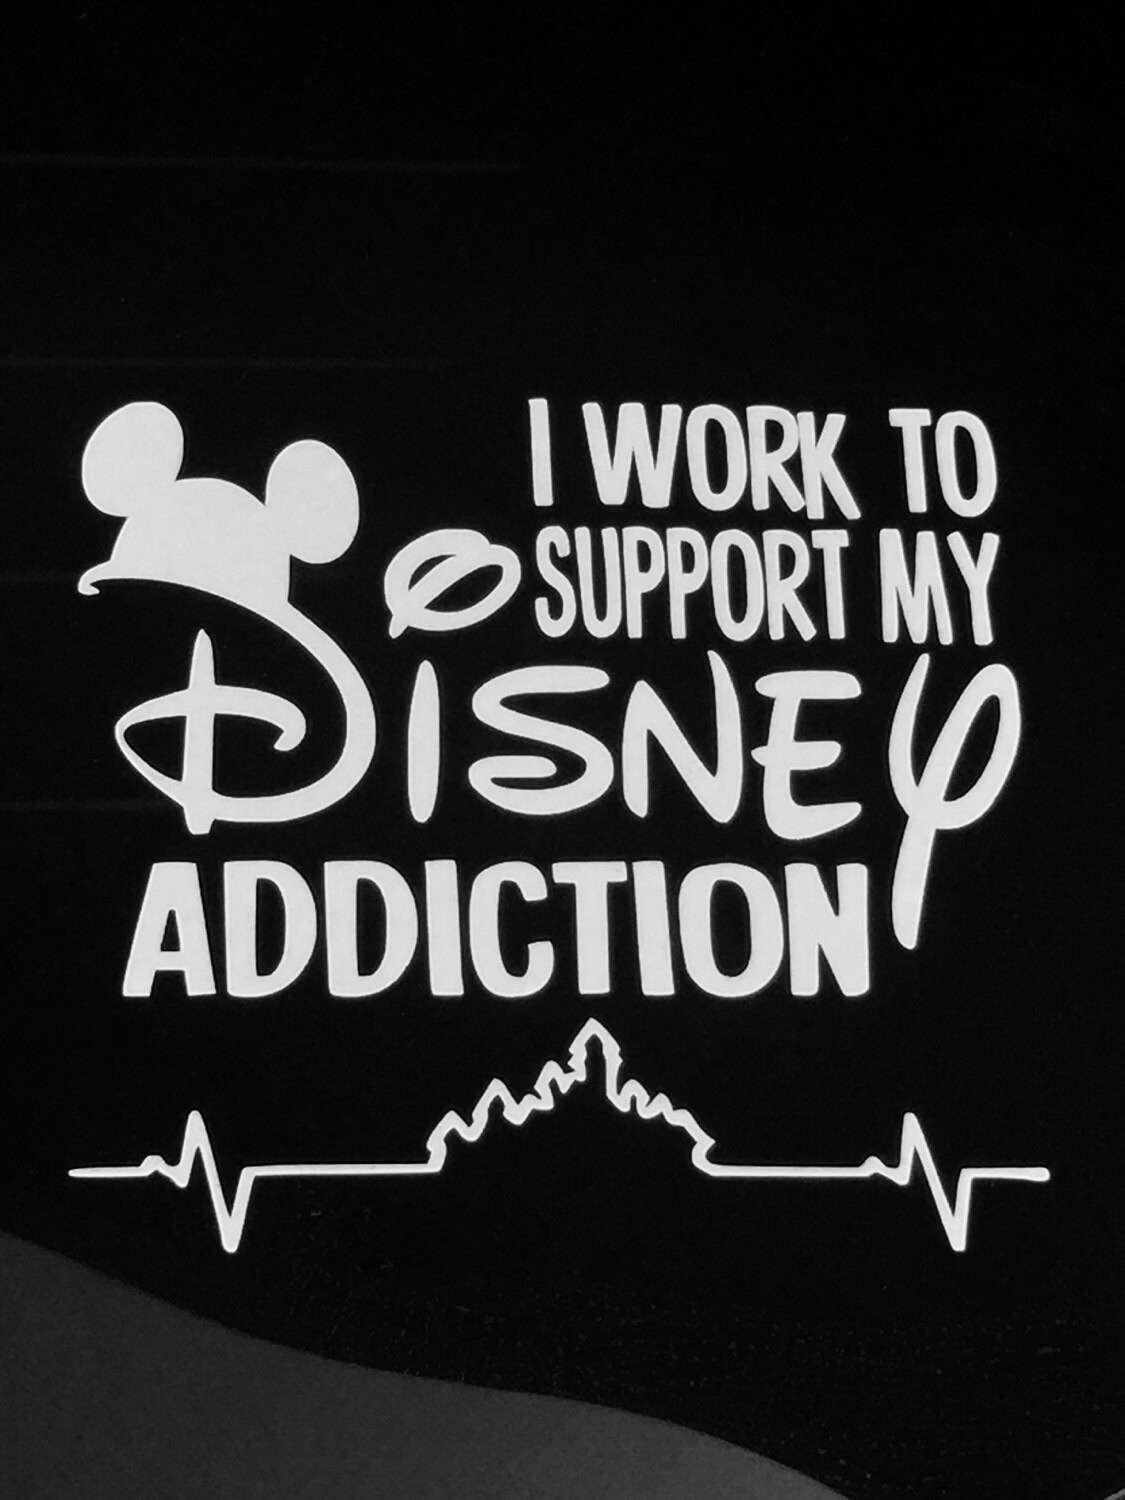 Download I Work To Support My Disney Addiction vinyl car decal